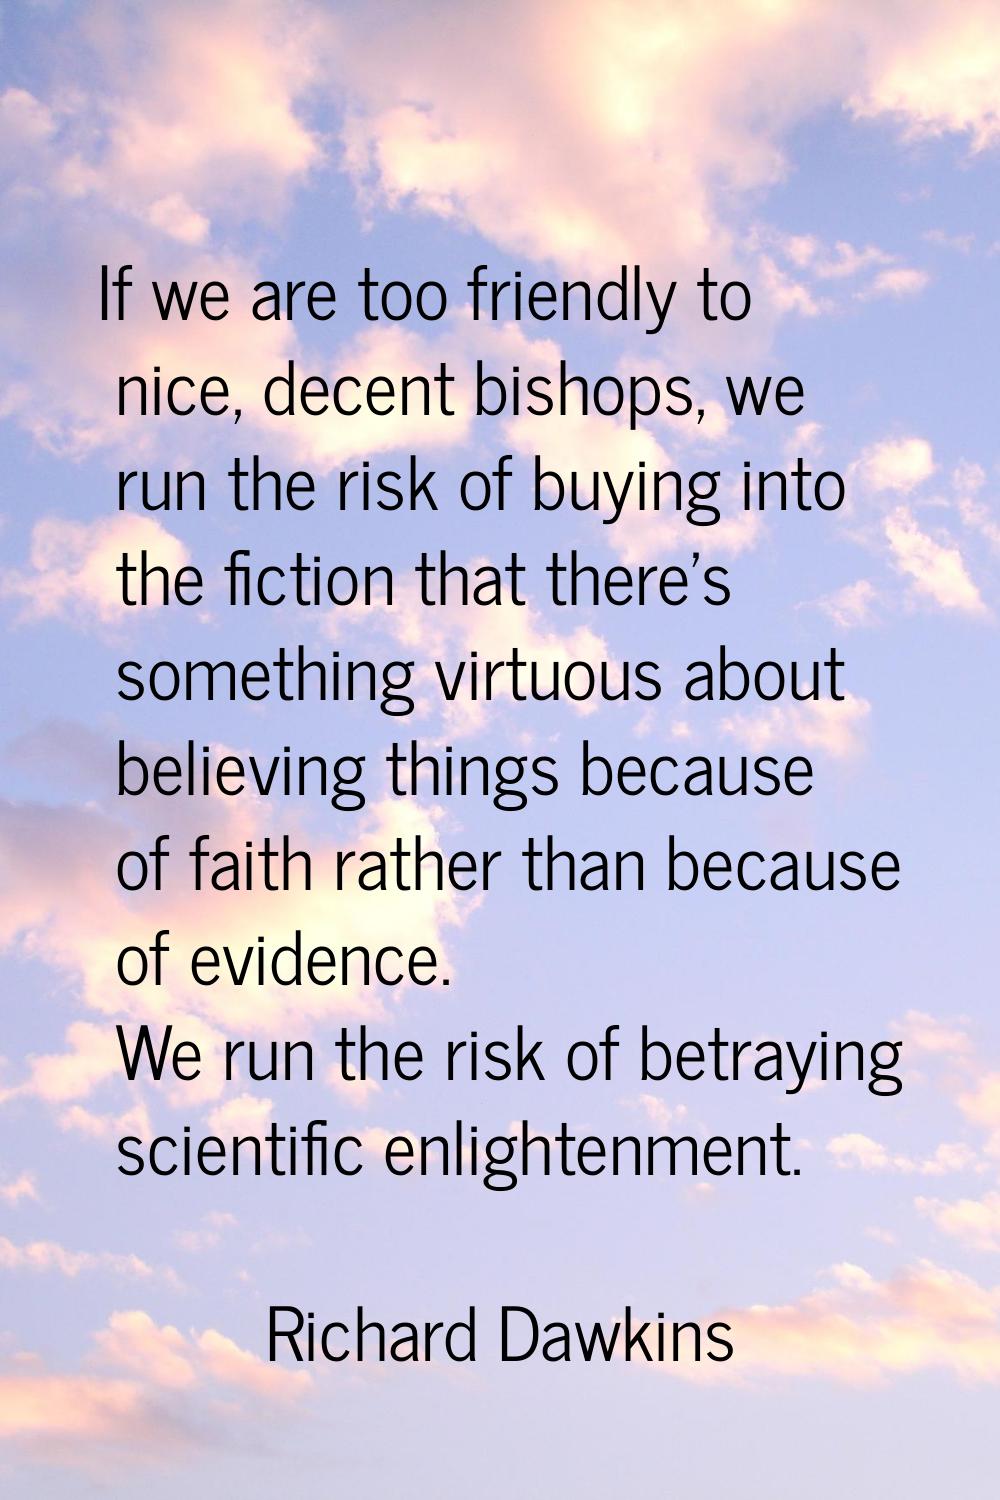 If we are too friendly to nice, decent bishops, we run the risk of buying into the fiction that the